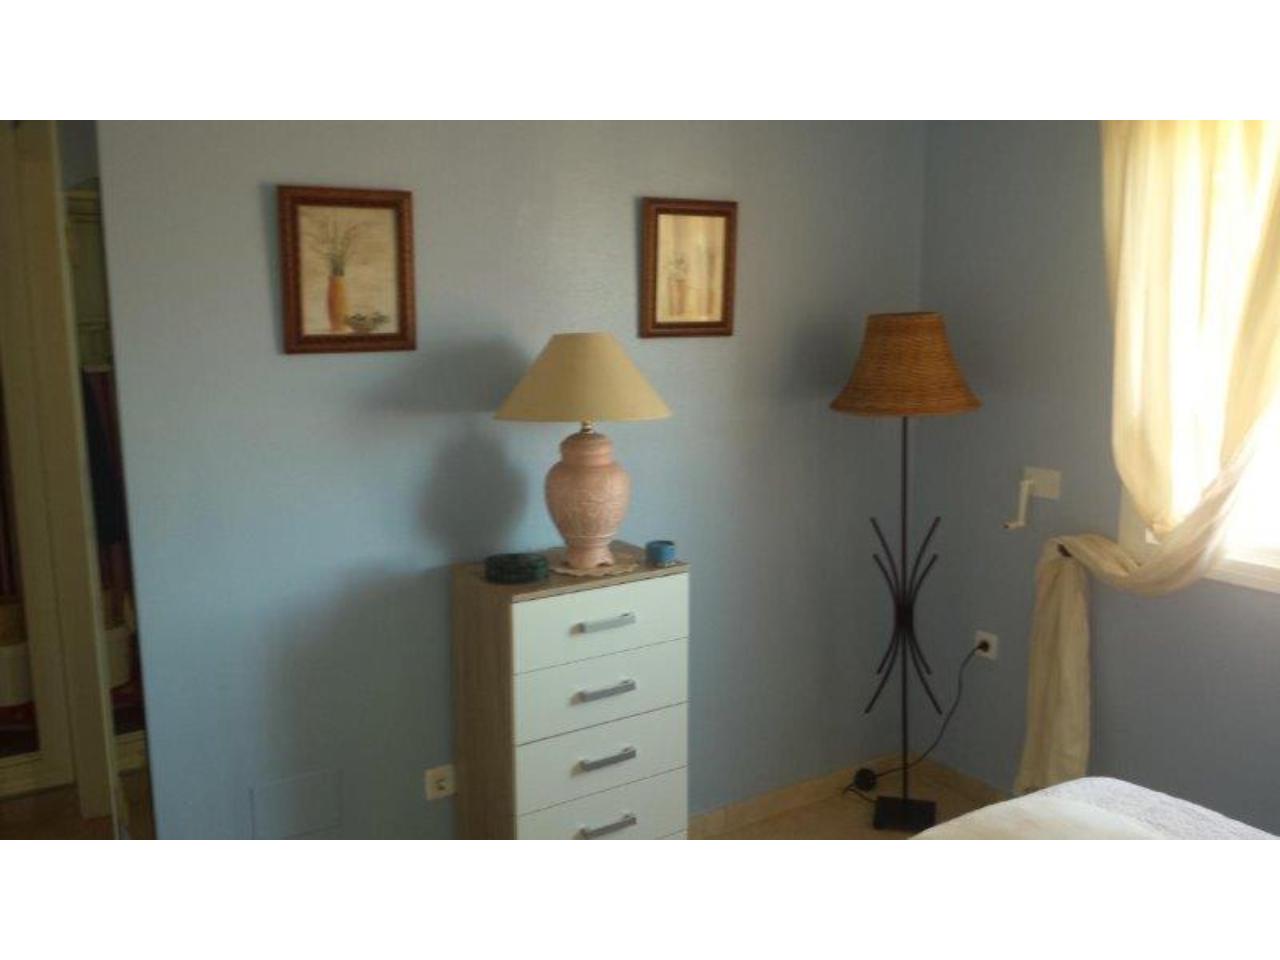 2 bedroom apartment for rent in Manilva near the beach - mibgroup.es